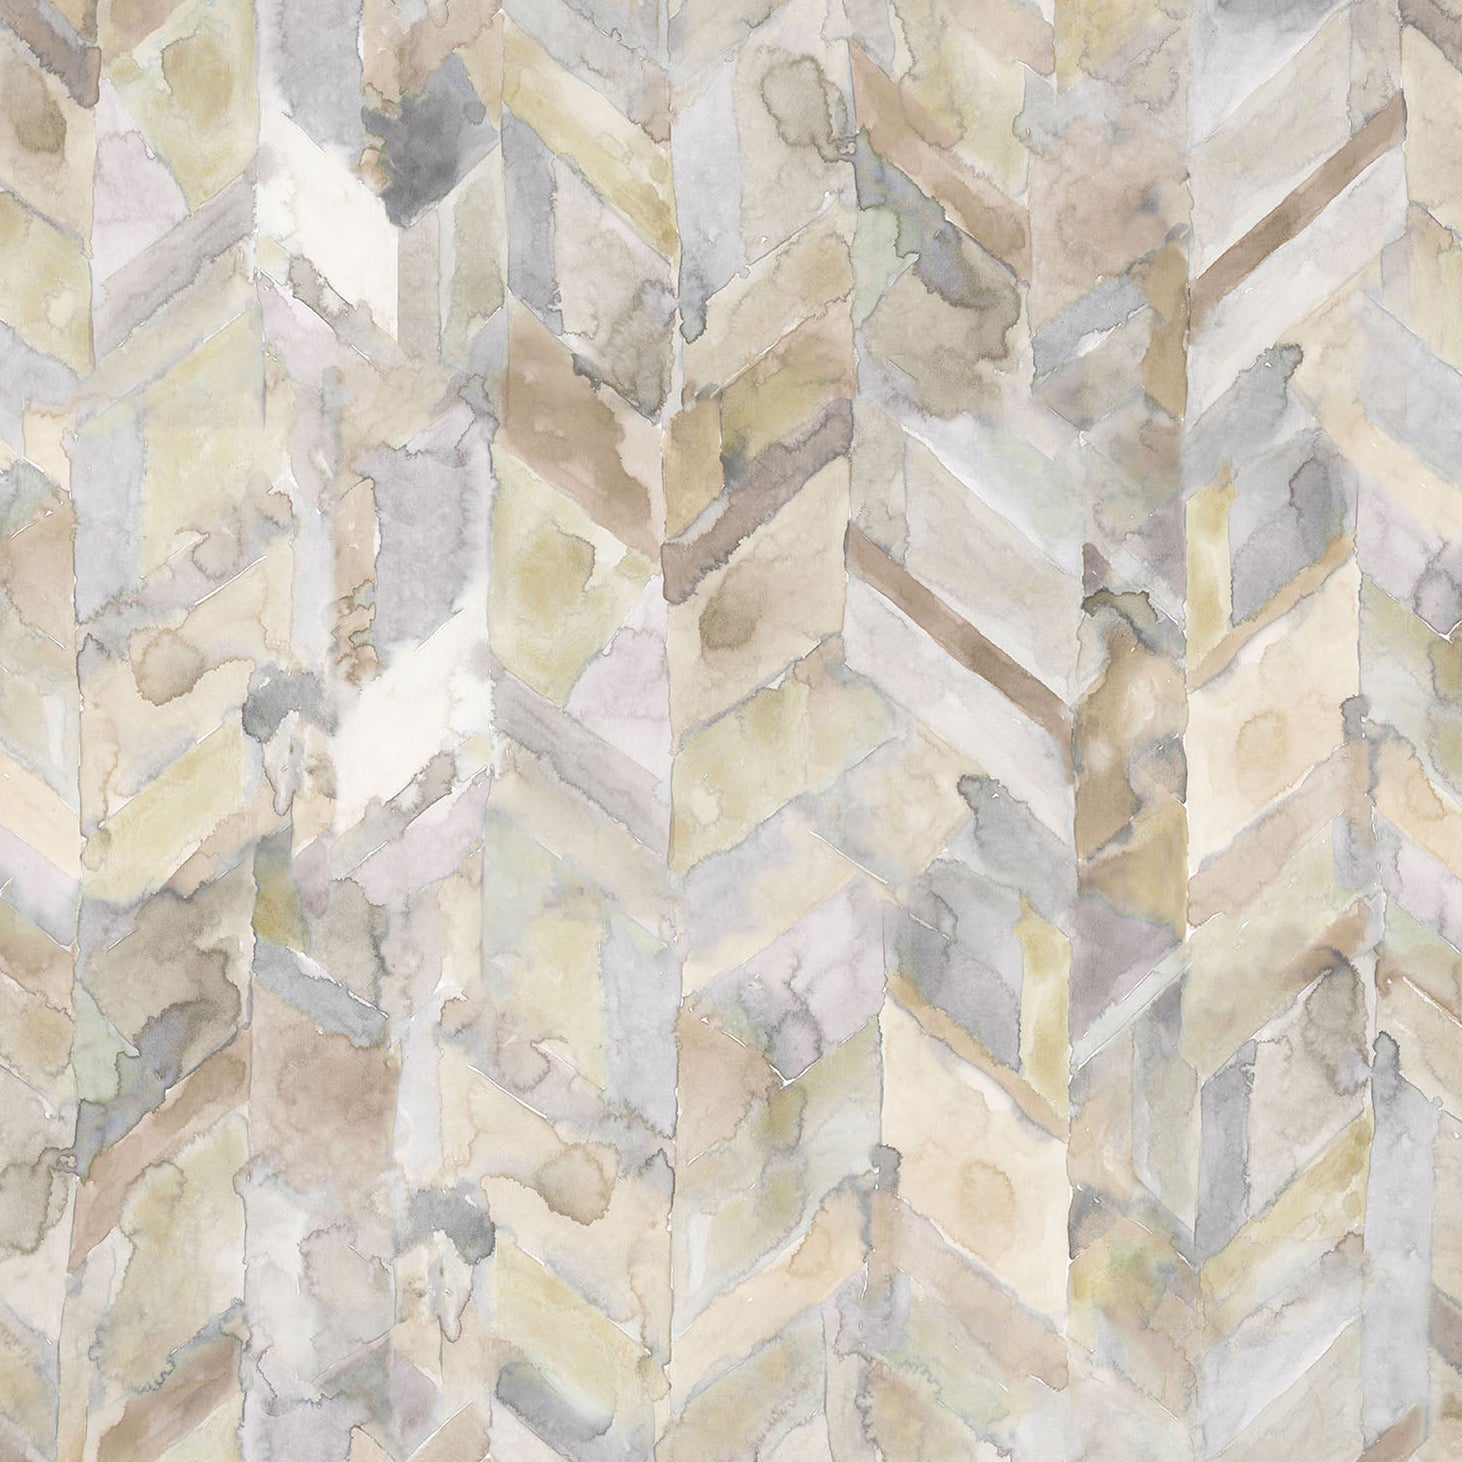 Detail of wallpaper in a painterly herringbone print in shades of gray, tan and cream.